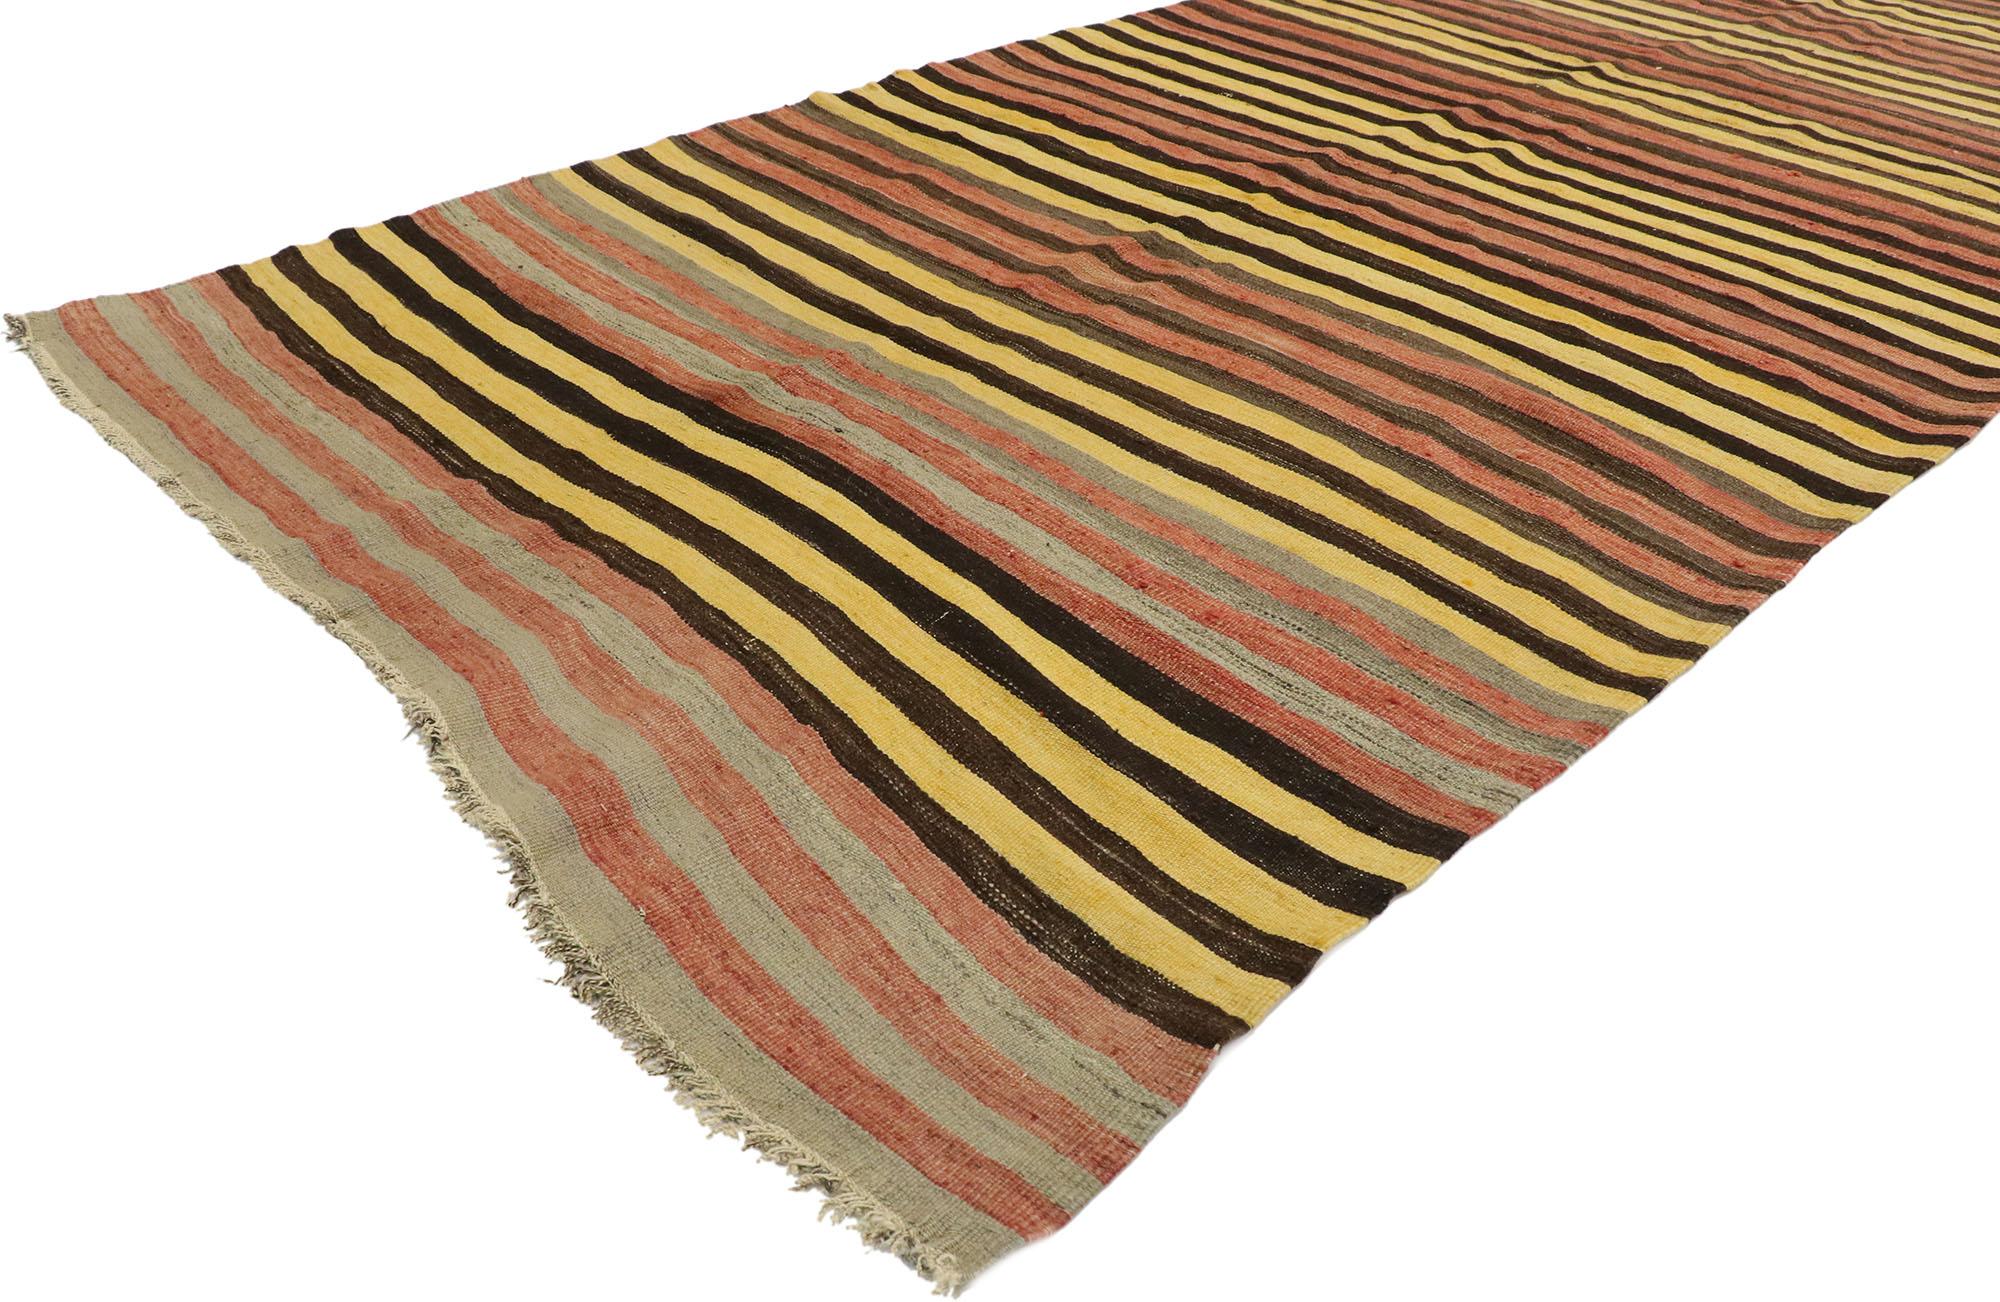 53116 vintage Turkish striped Kilim rug with Mid-Century Modern style. With its warm hues and rugged beauty, this hand-woven wool striped kilim rug manages to meld contemporary, modern, and traditional design elements. The flat-weave kilim rug